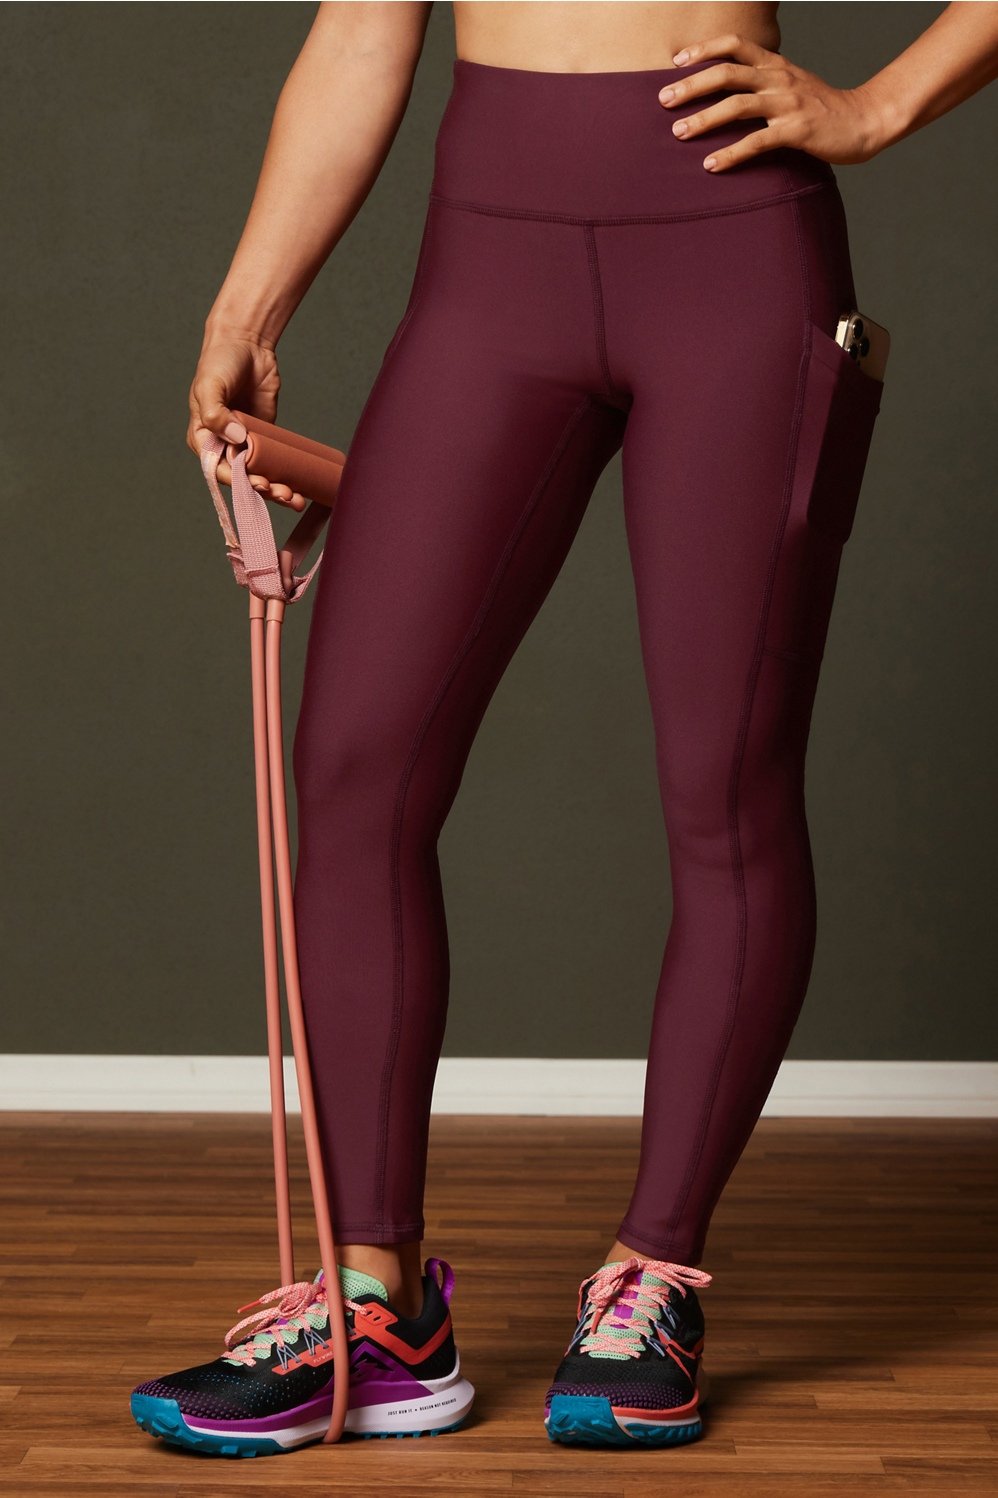 Picklehigh™ Blackout Leggings with pockets